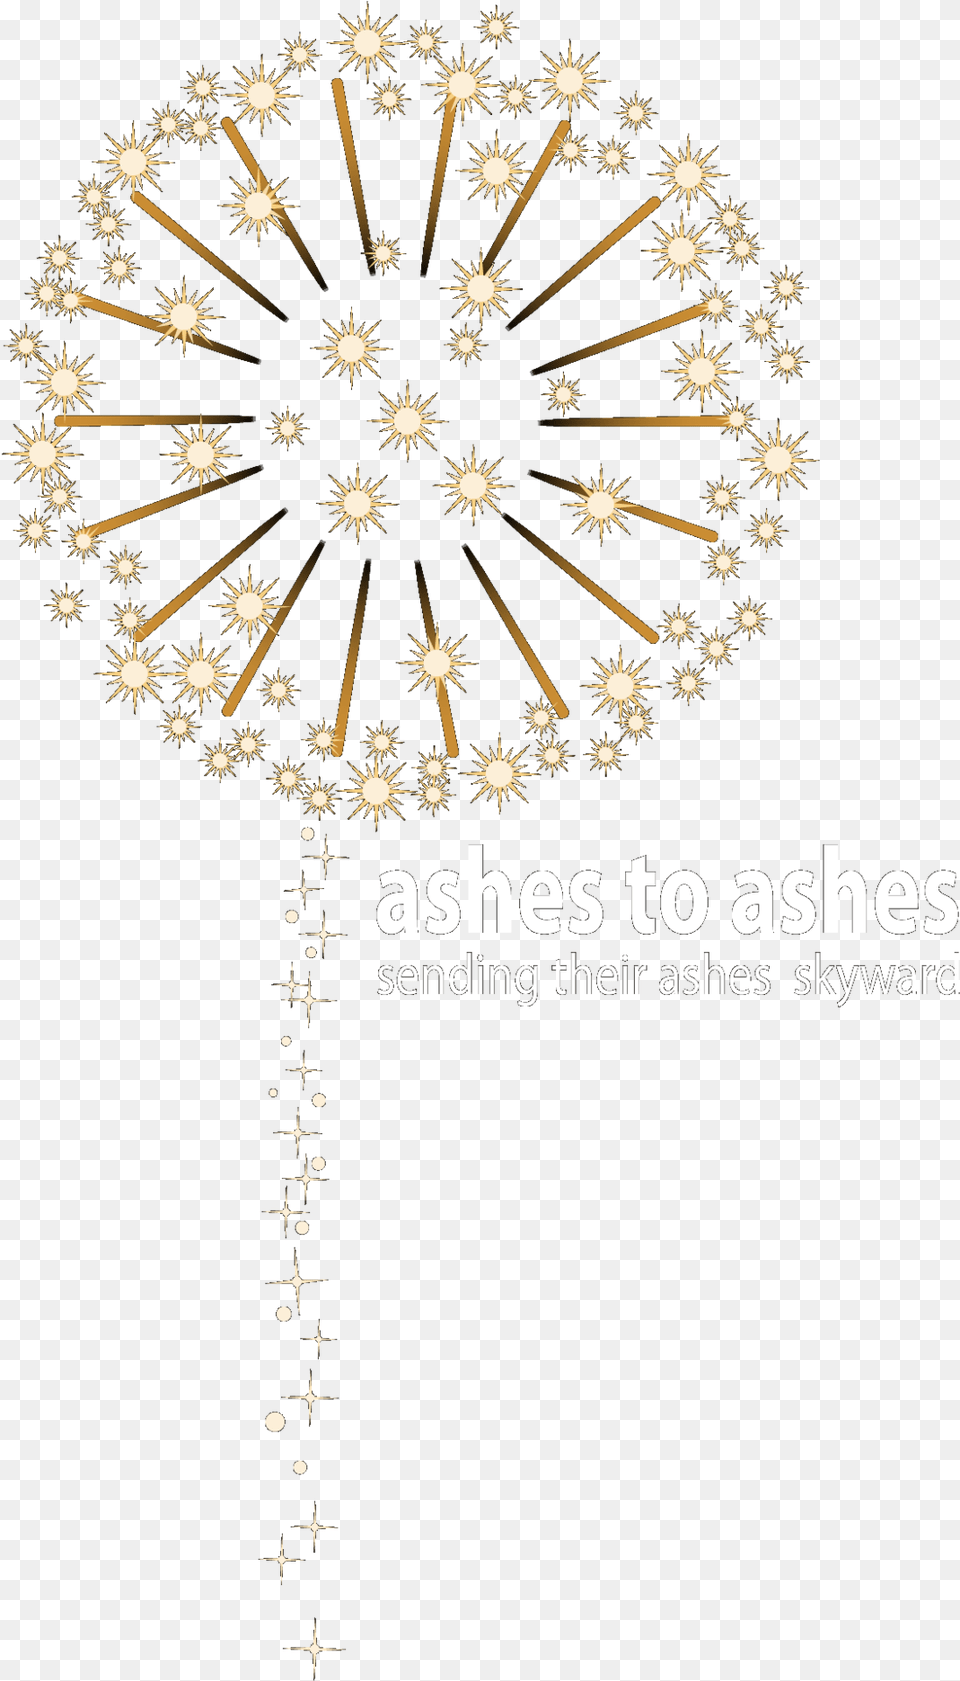 Fire Ashes Picture Ash, Flower, Plant, Fireworks, Dandelion Png